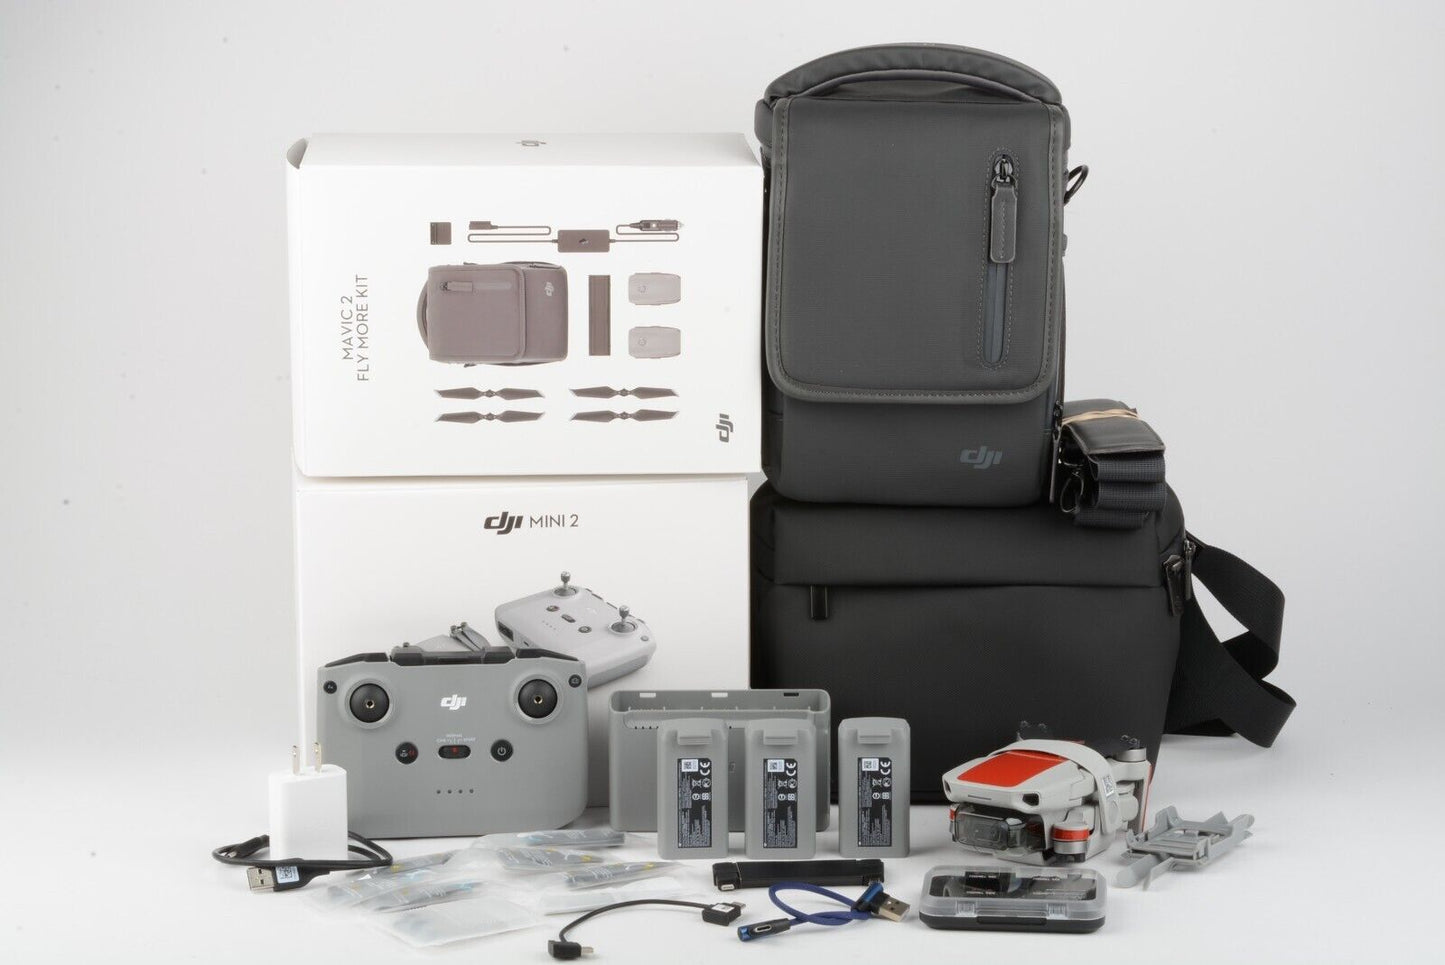 EXC+++ DJI MINI 2 FLY MORE COMBO COMPLETE KIT, 3BATTS, FILTERS, AC/DC CHARGERS